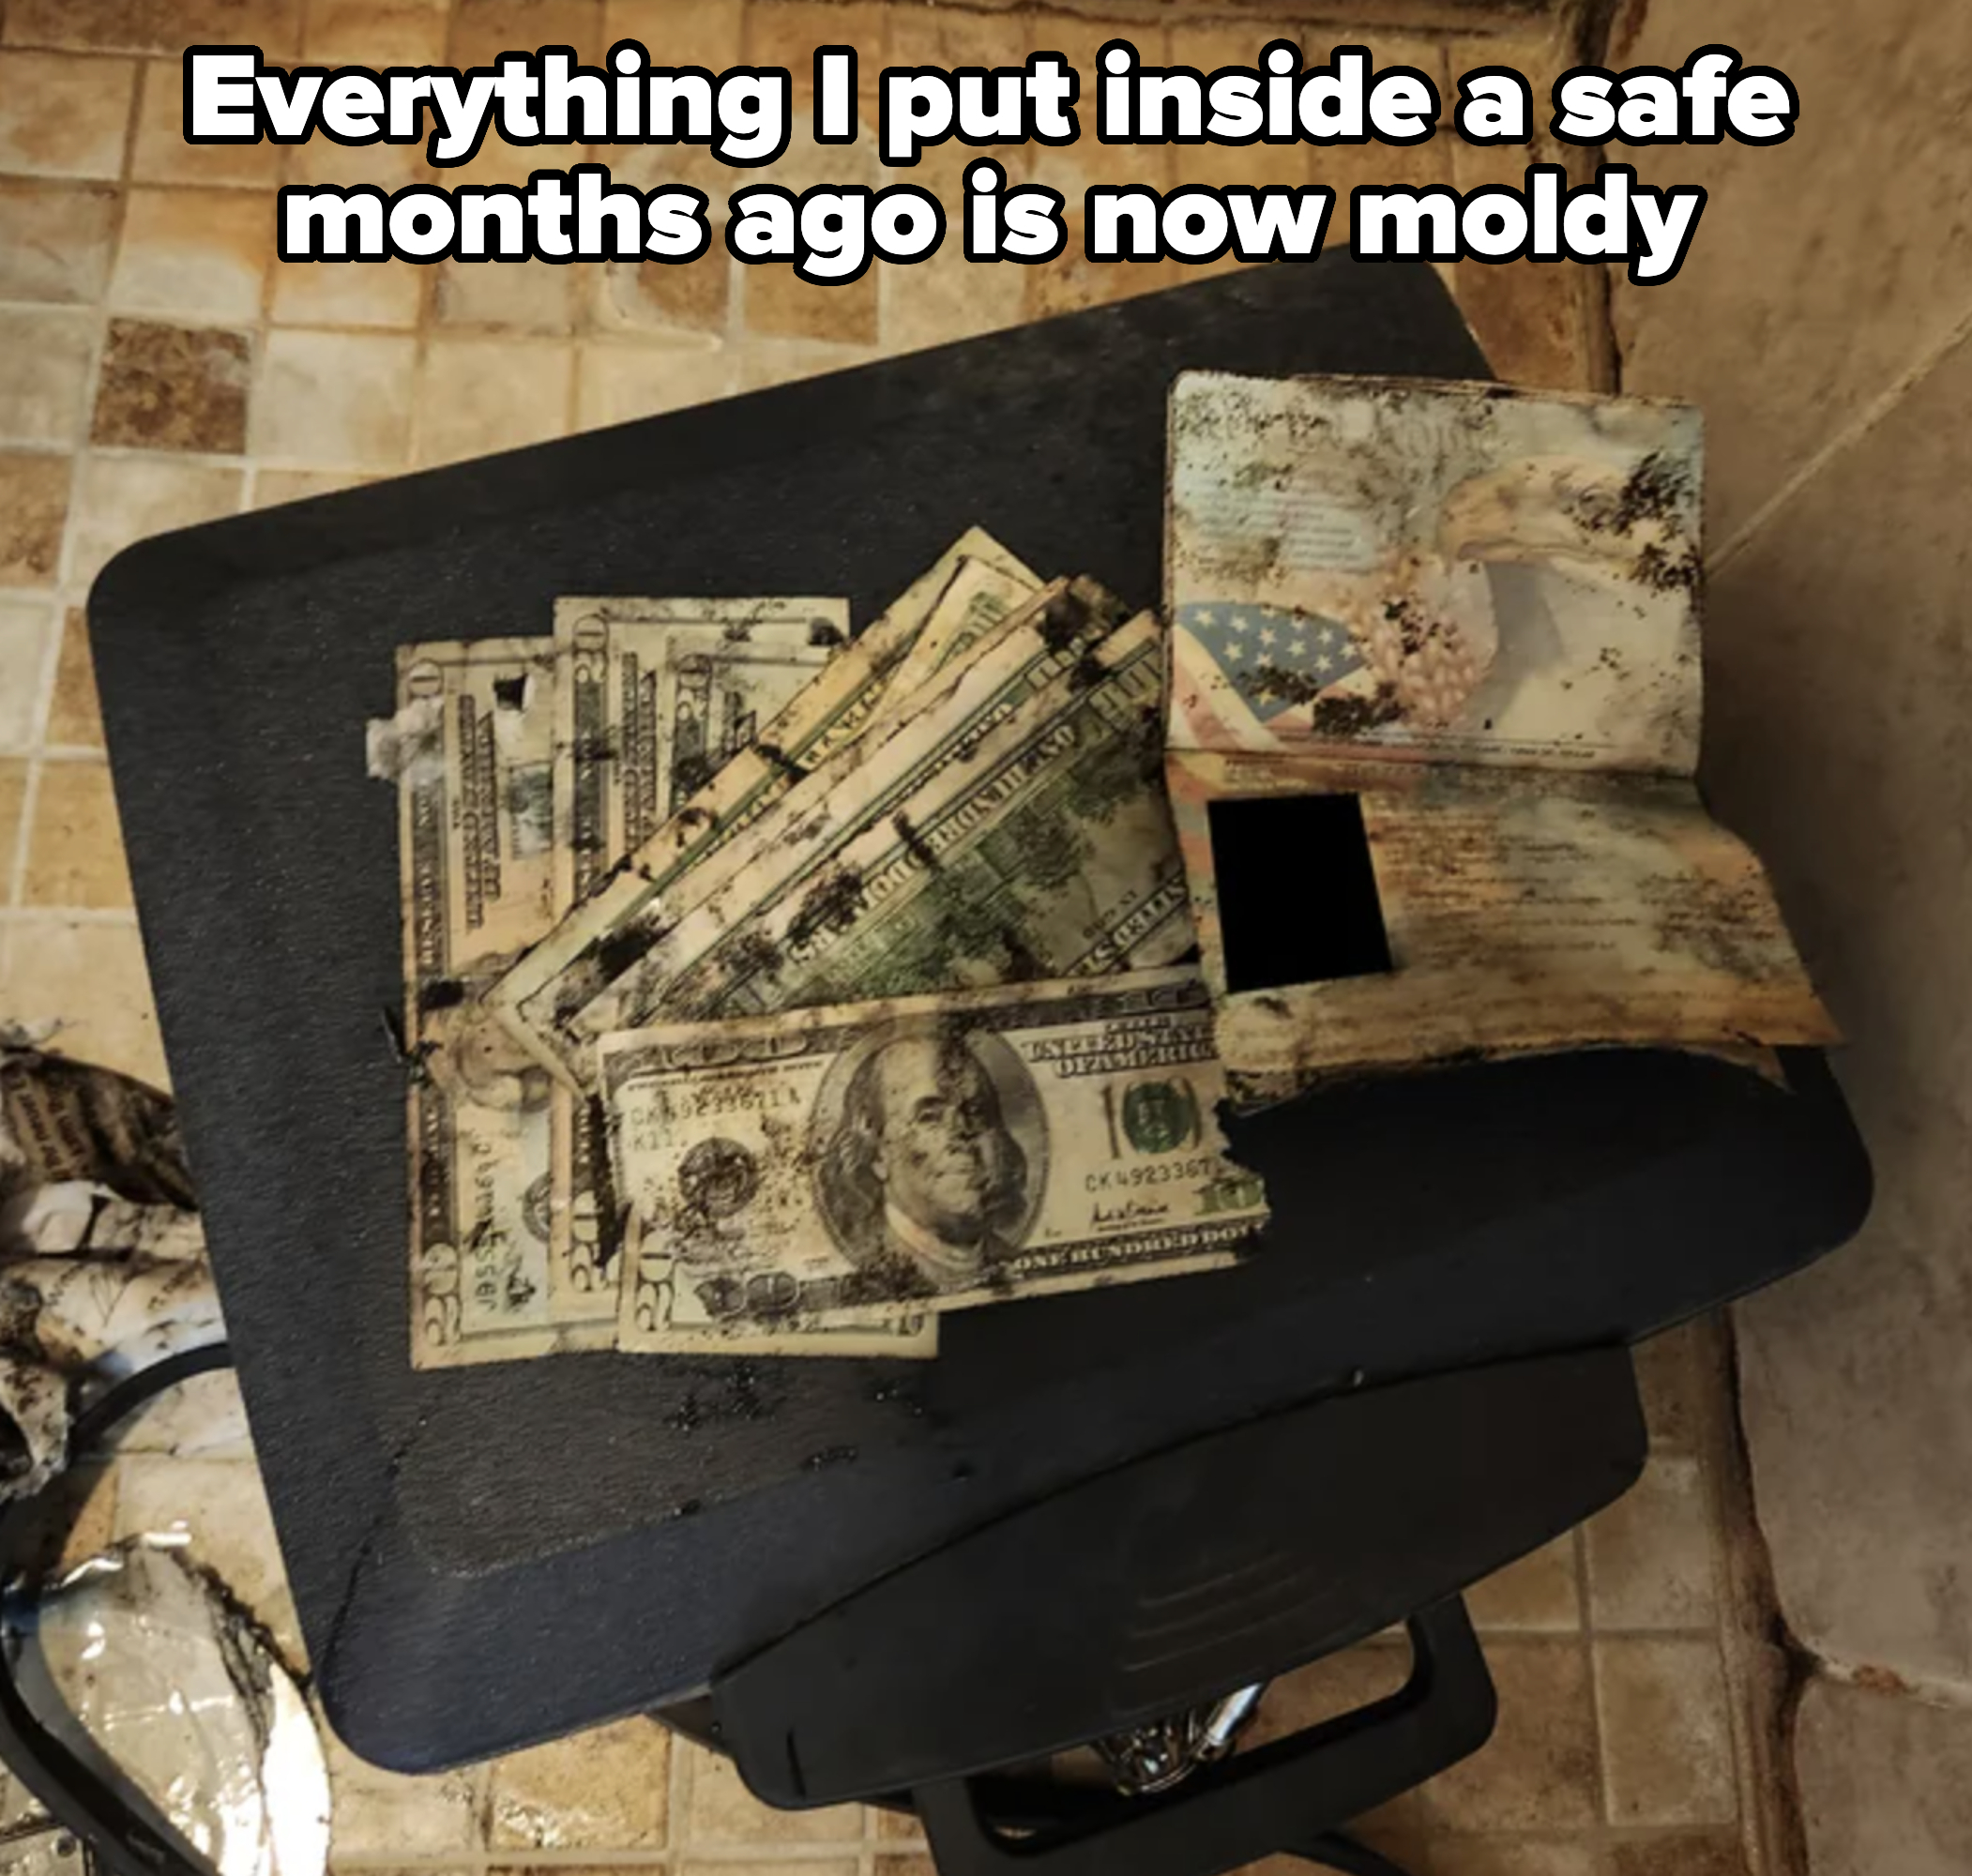 Moldy cash, including $20 and $100 bills, and a passport in a safe